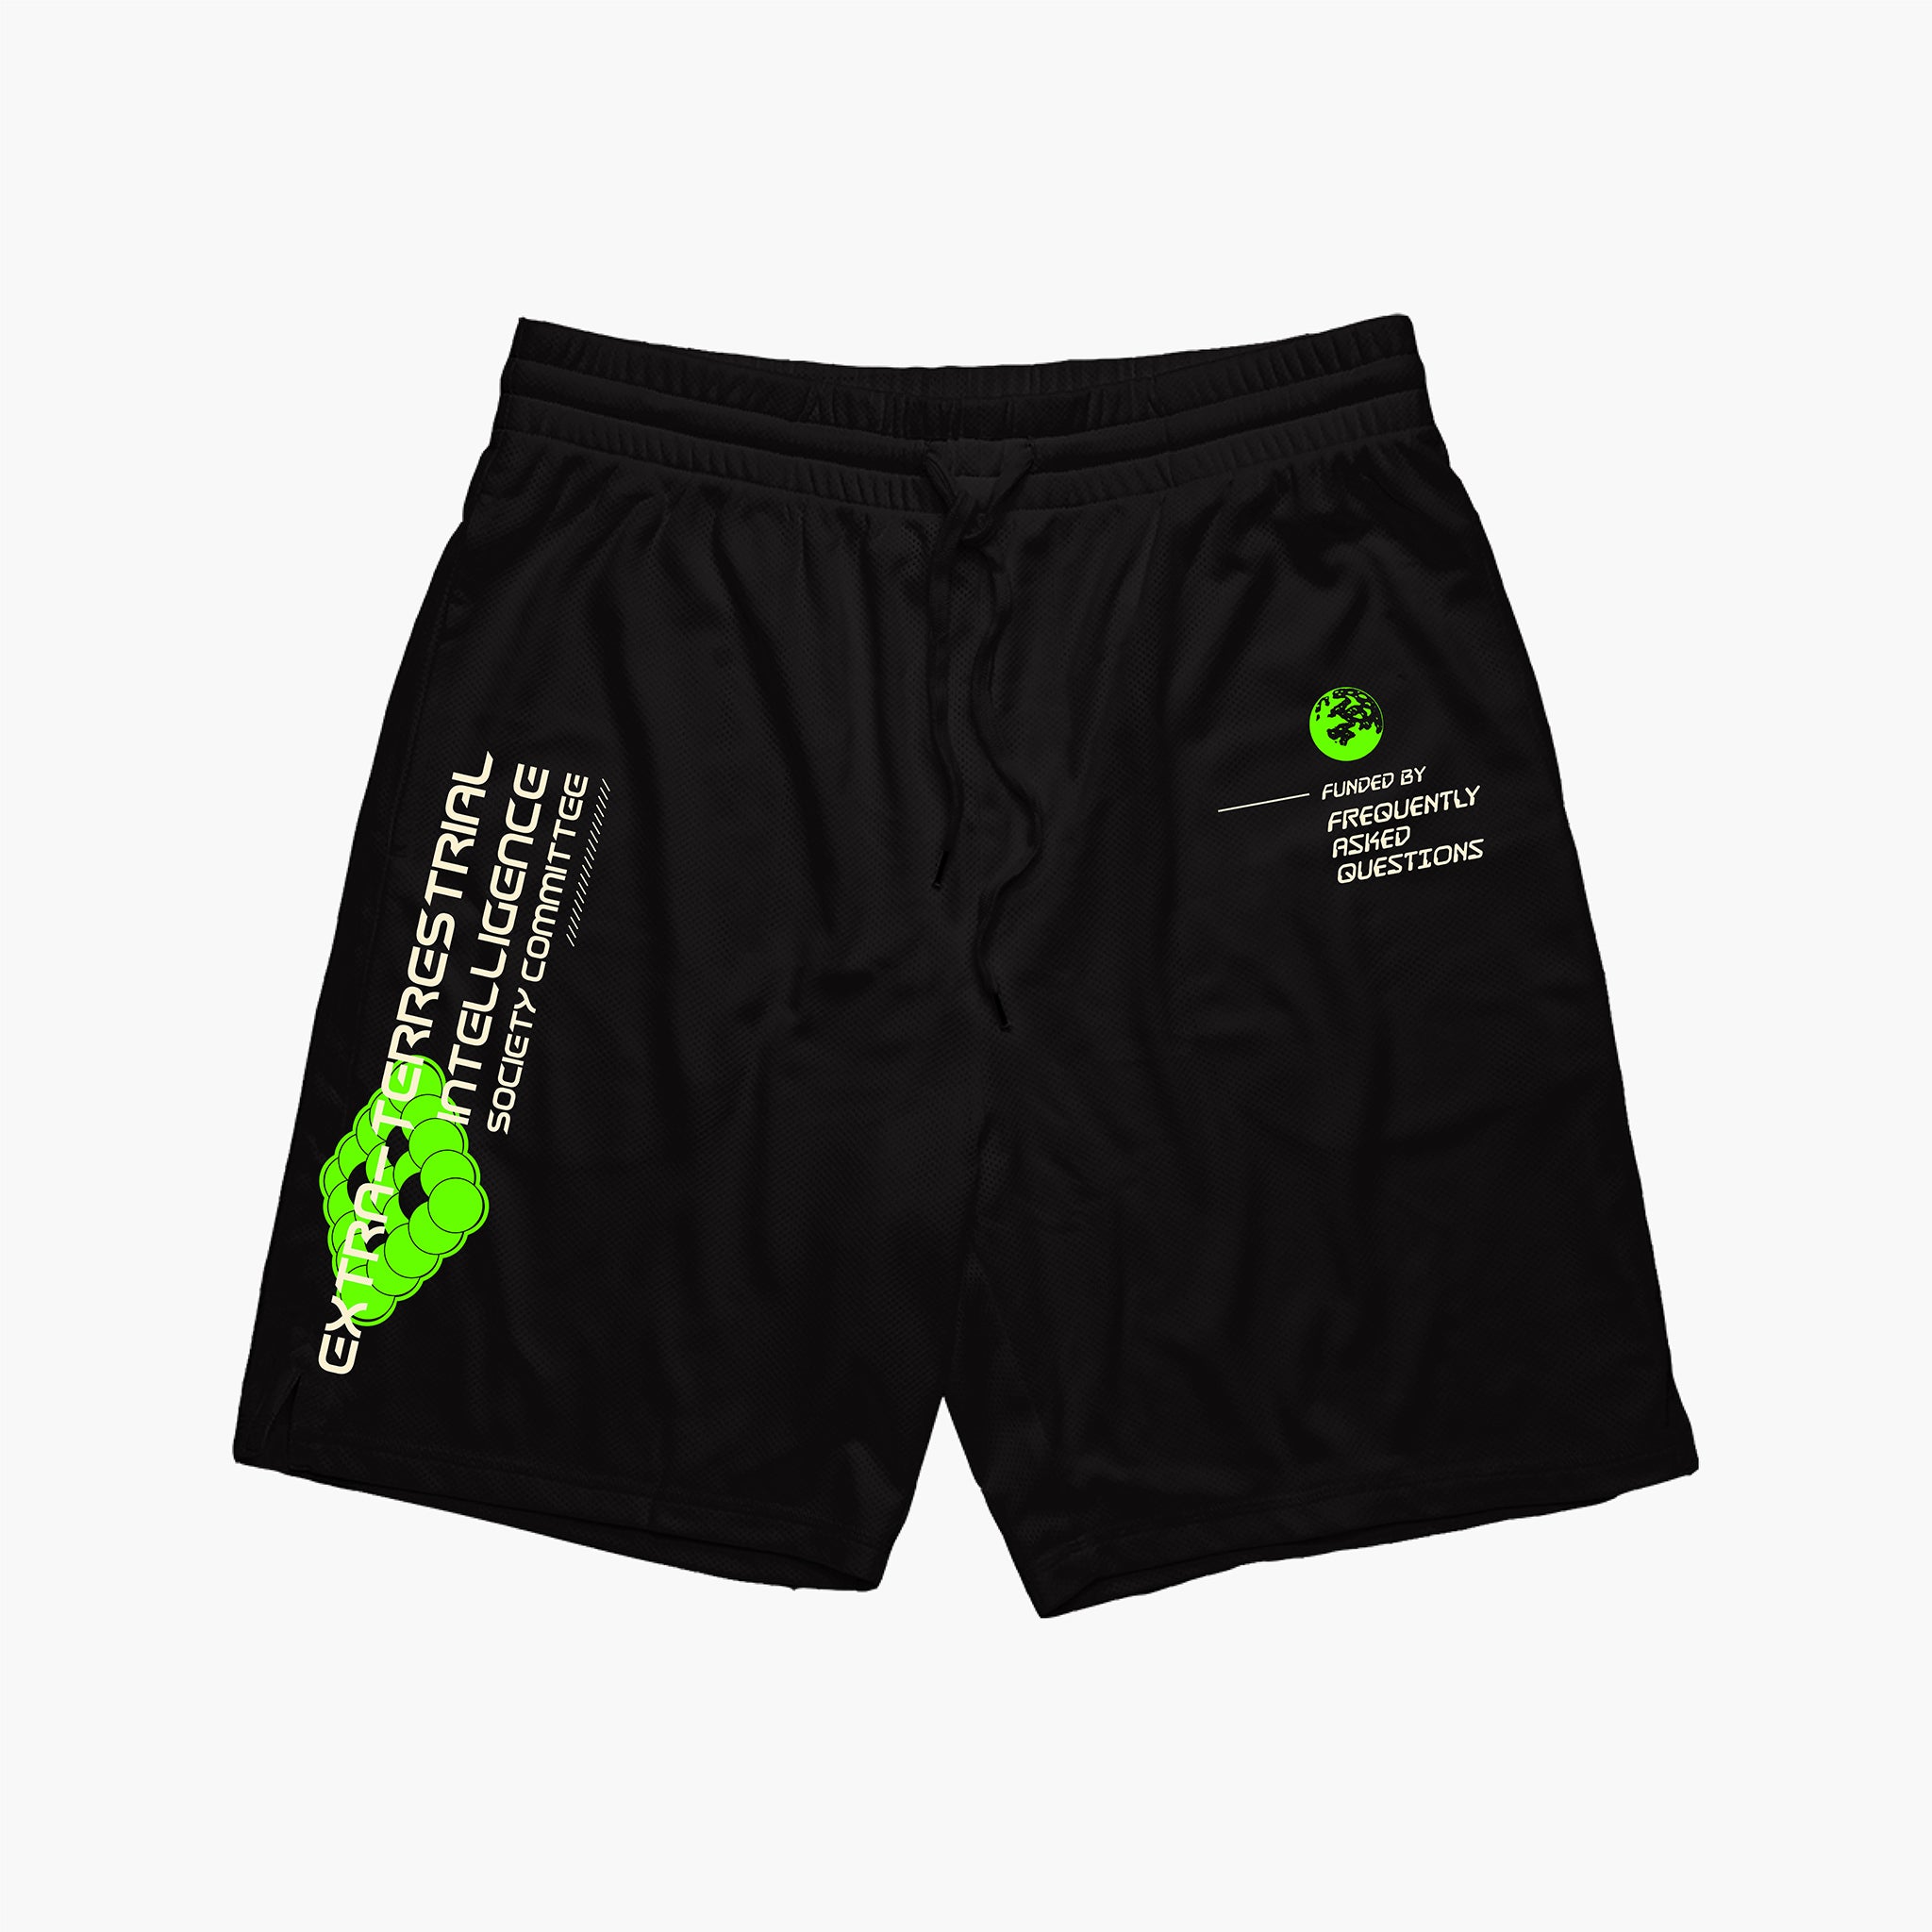 E.T.I.S.C. Stadium Shorts - Frequently Asked Questions